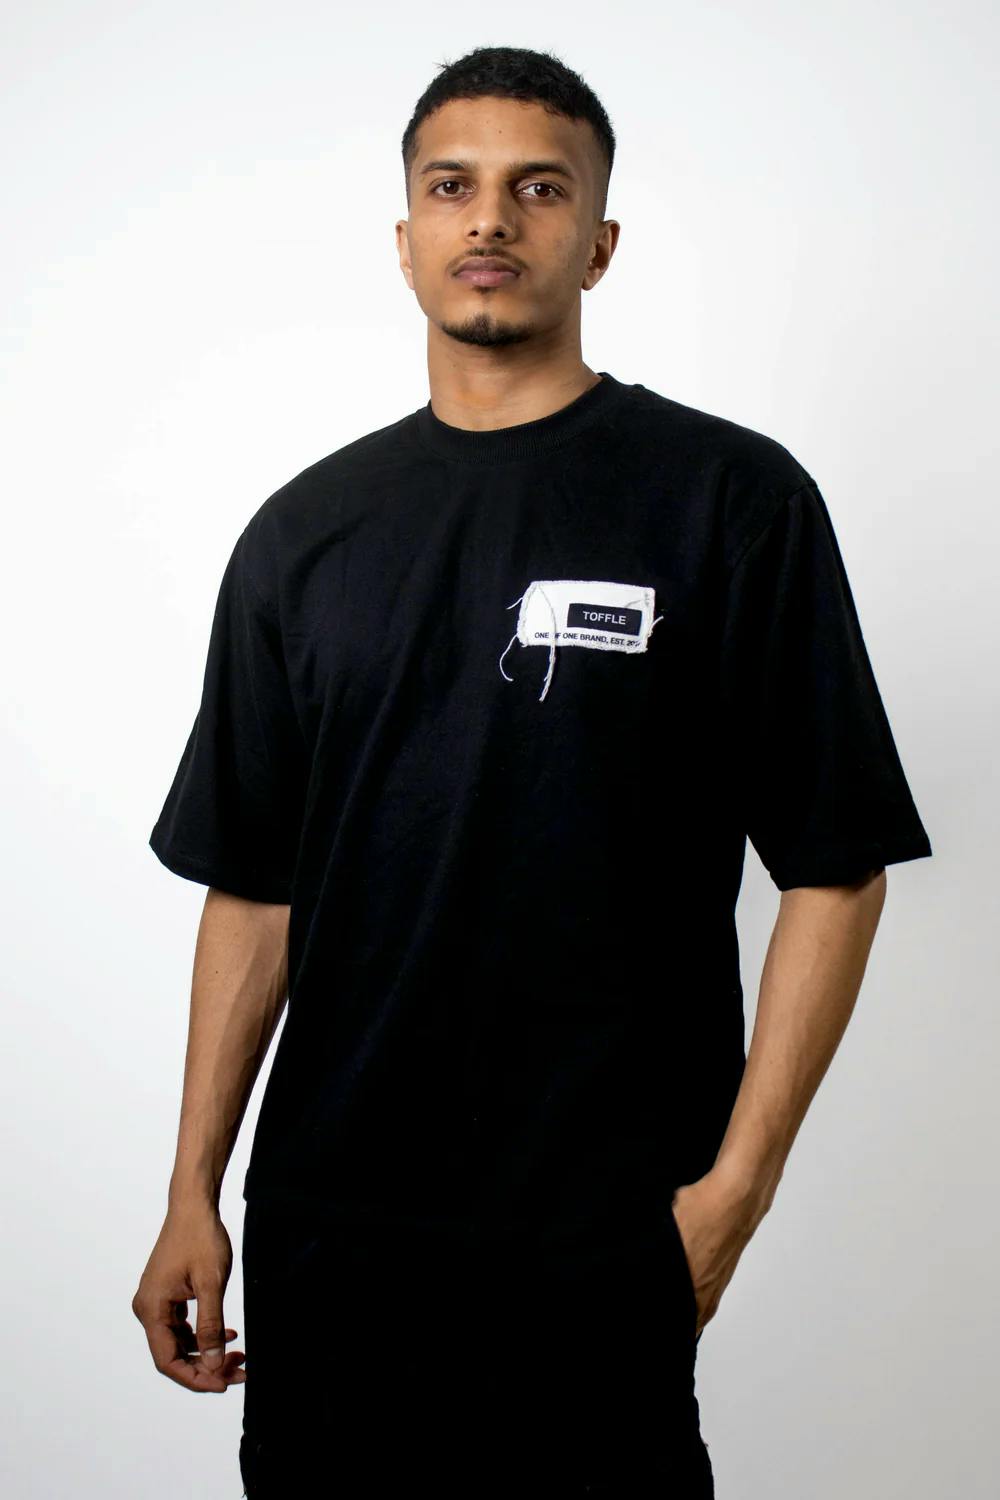 Toffle Black T-shirt, a product by TOFFLE